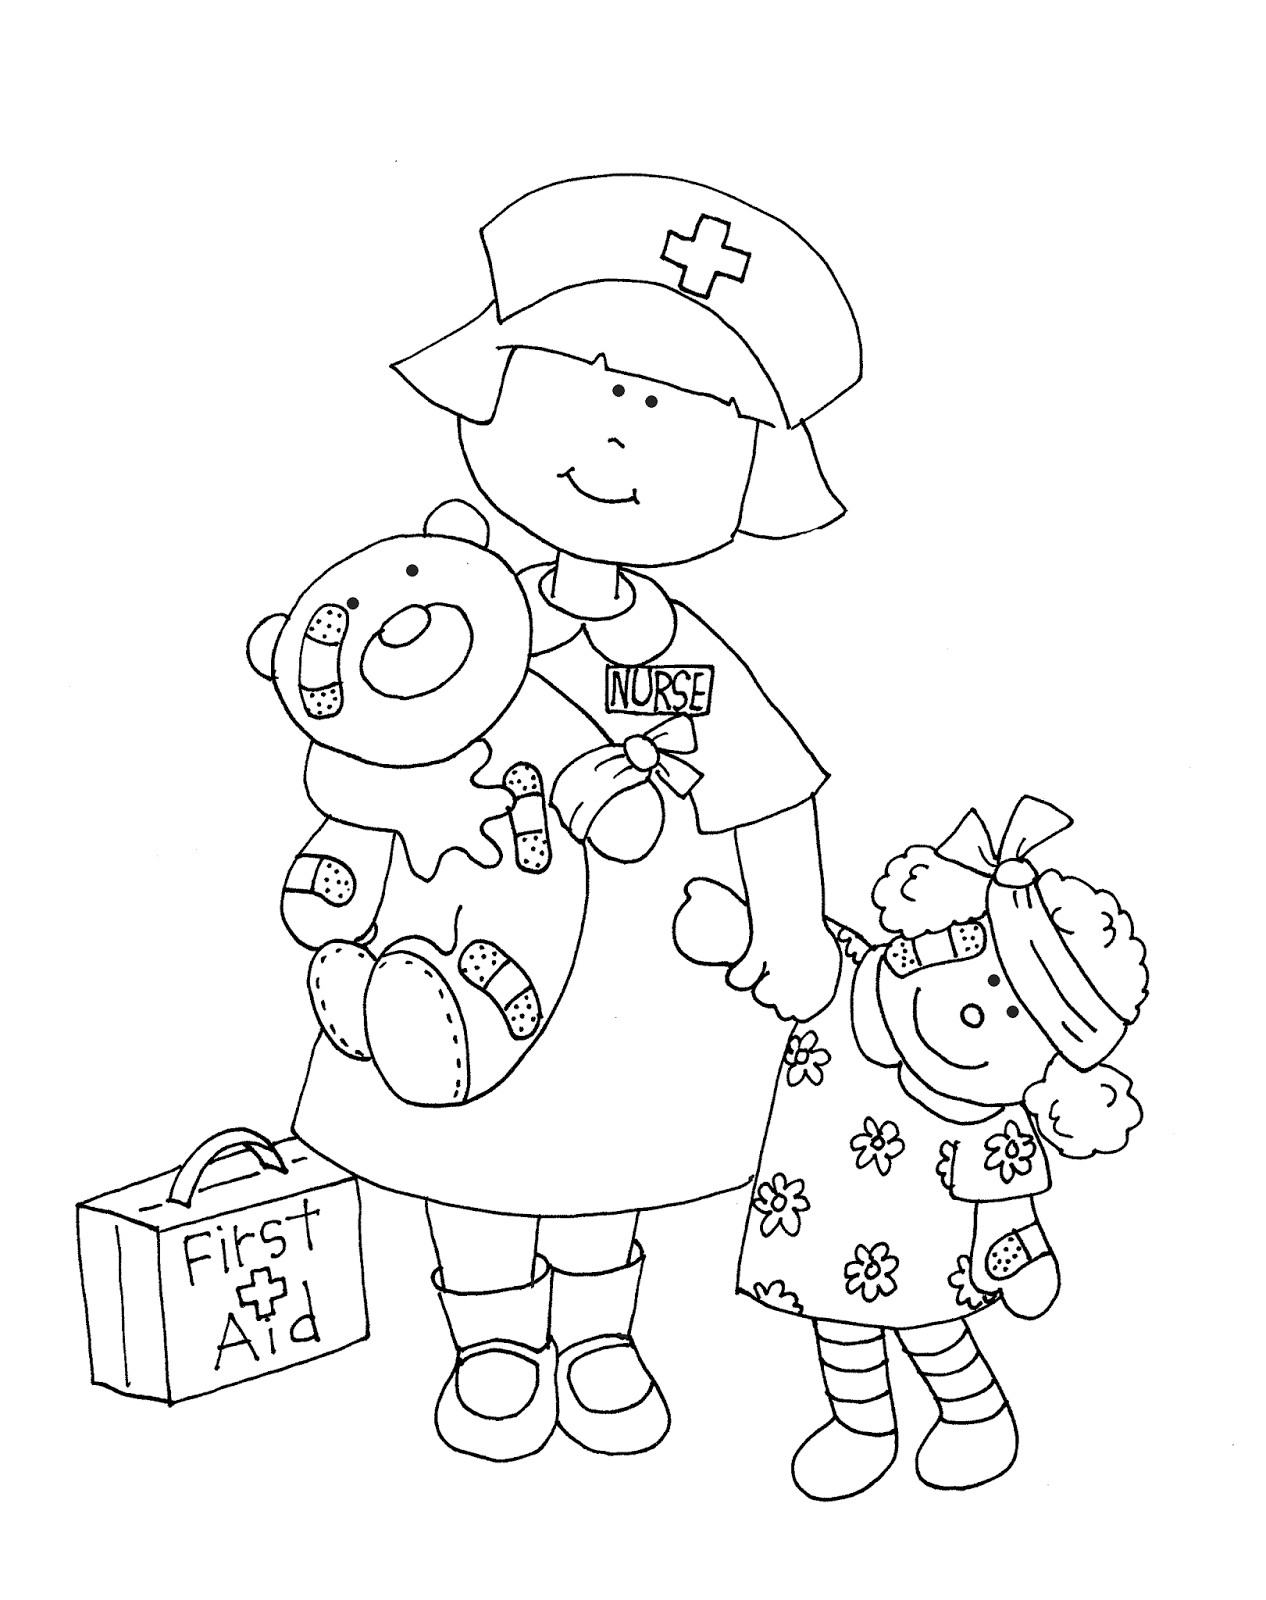 Nurse Coloring Pages For Preschool at Free printable